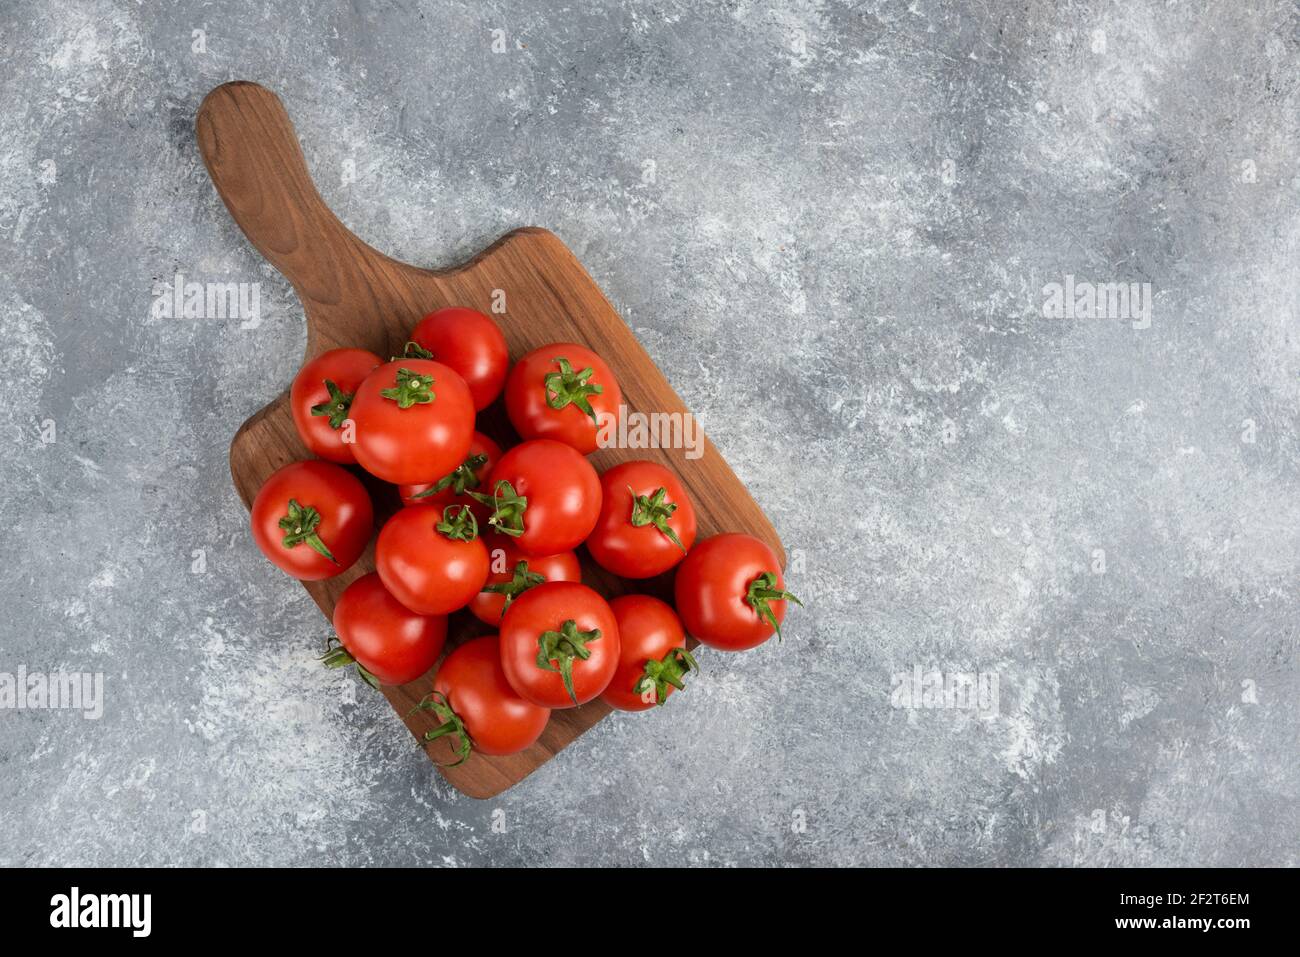 Bunch of red fresh tomatoes on wooden cutting board Stock Photo